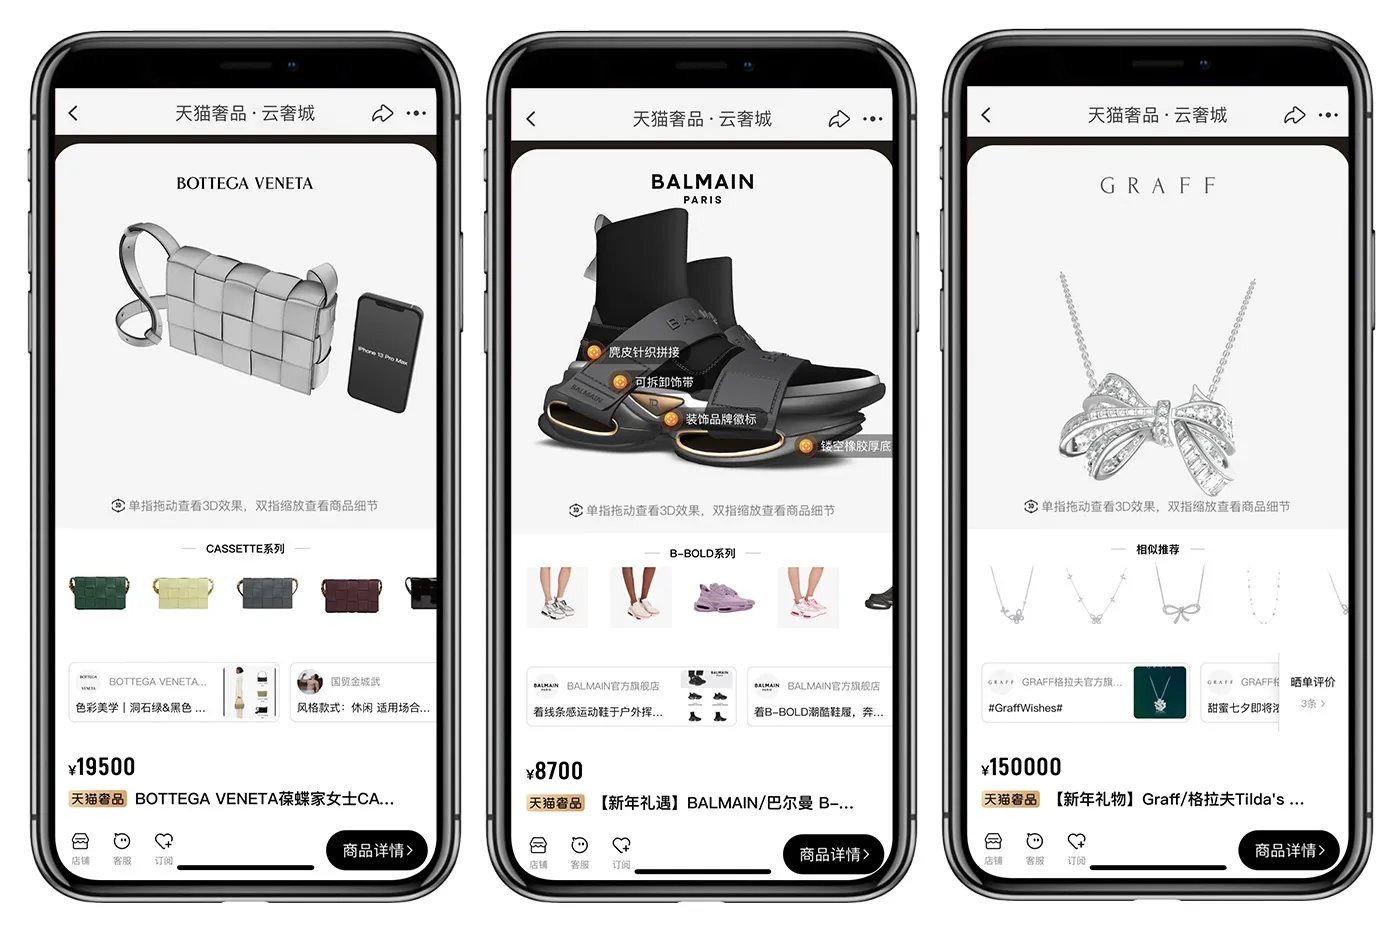 Tmall luxury pavilion product overview with AR VR features